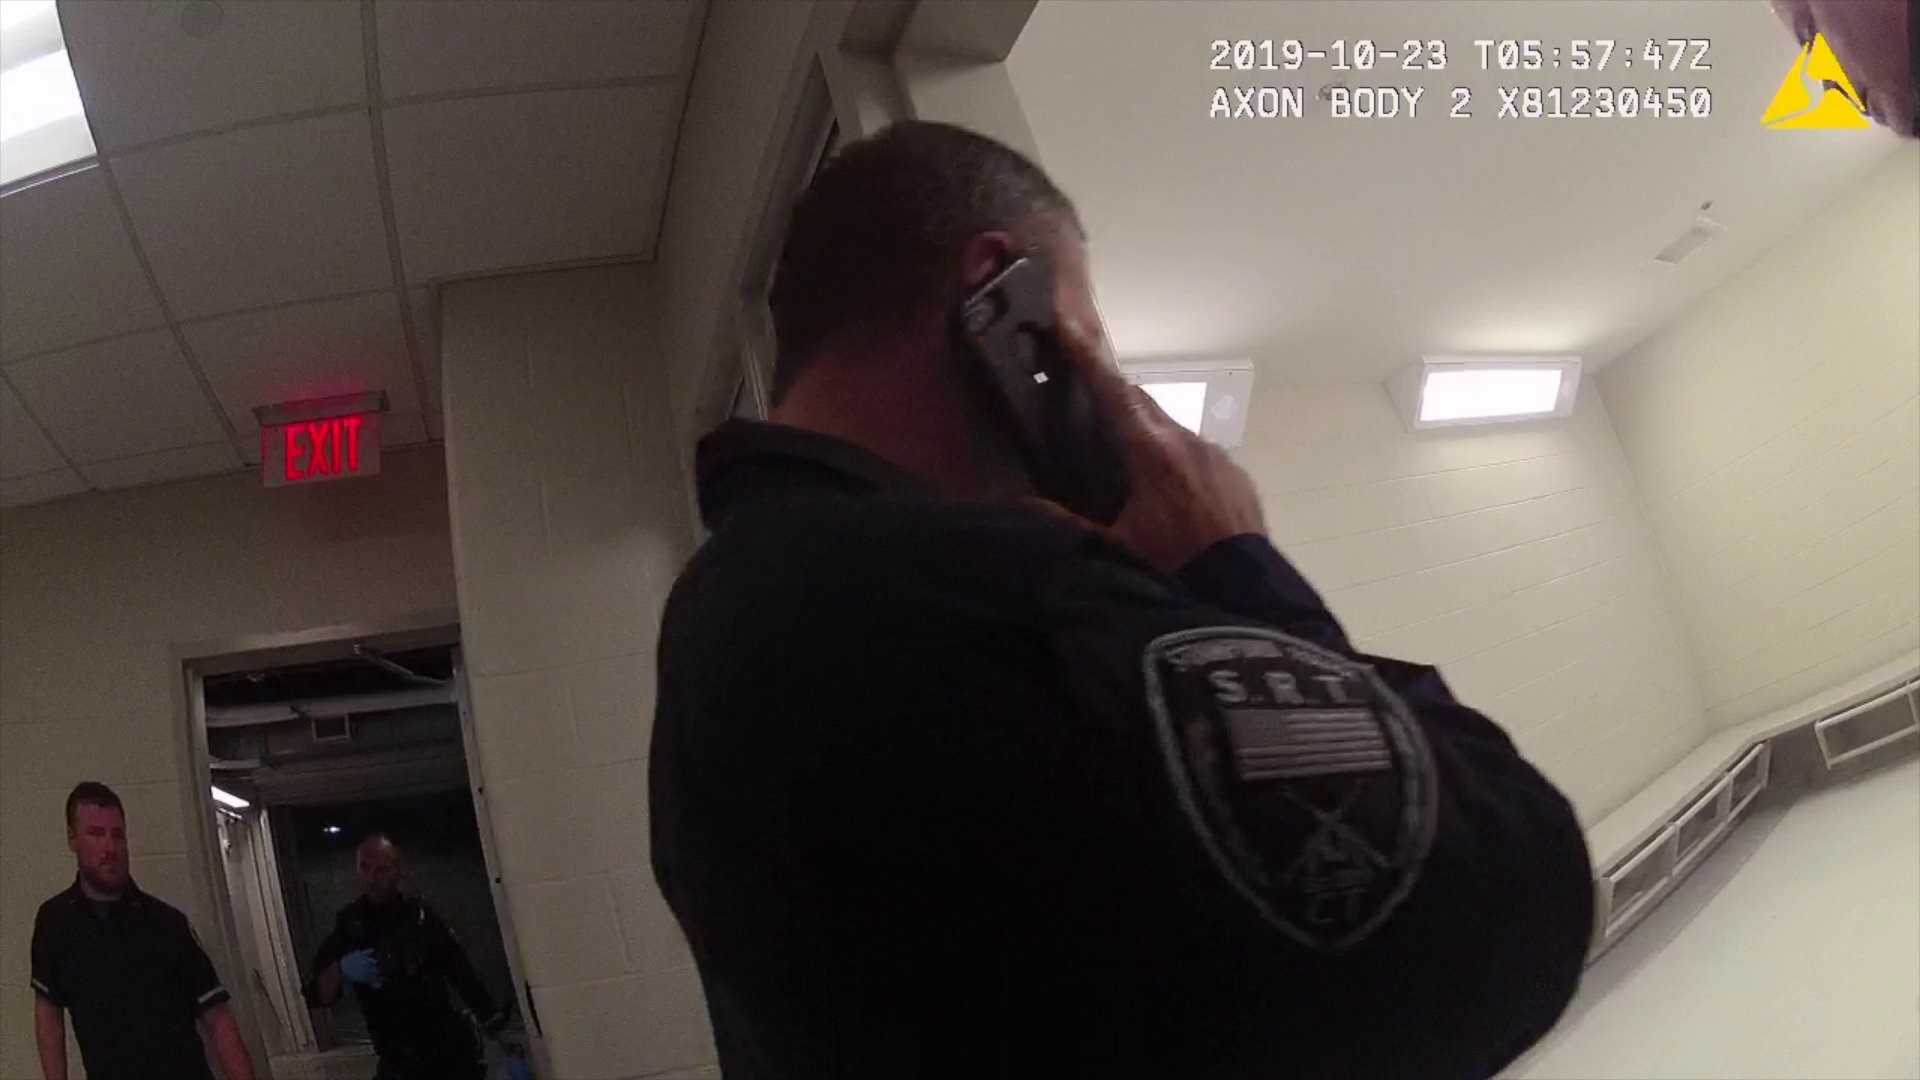 Body cam footage released of incident involving man who died in Stamford police custody-5